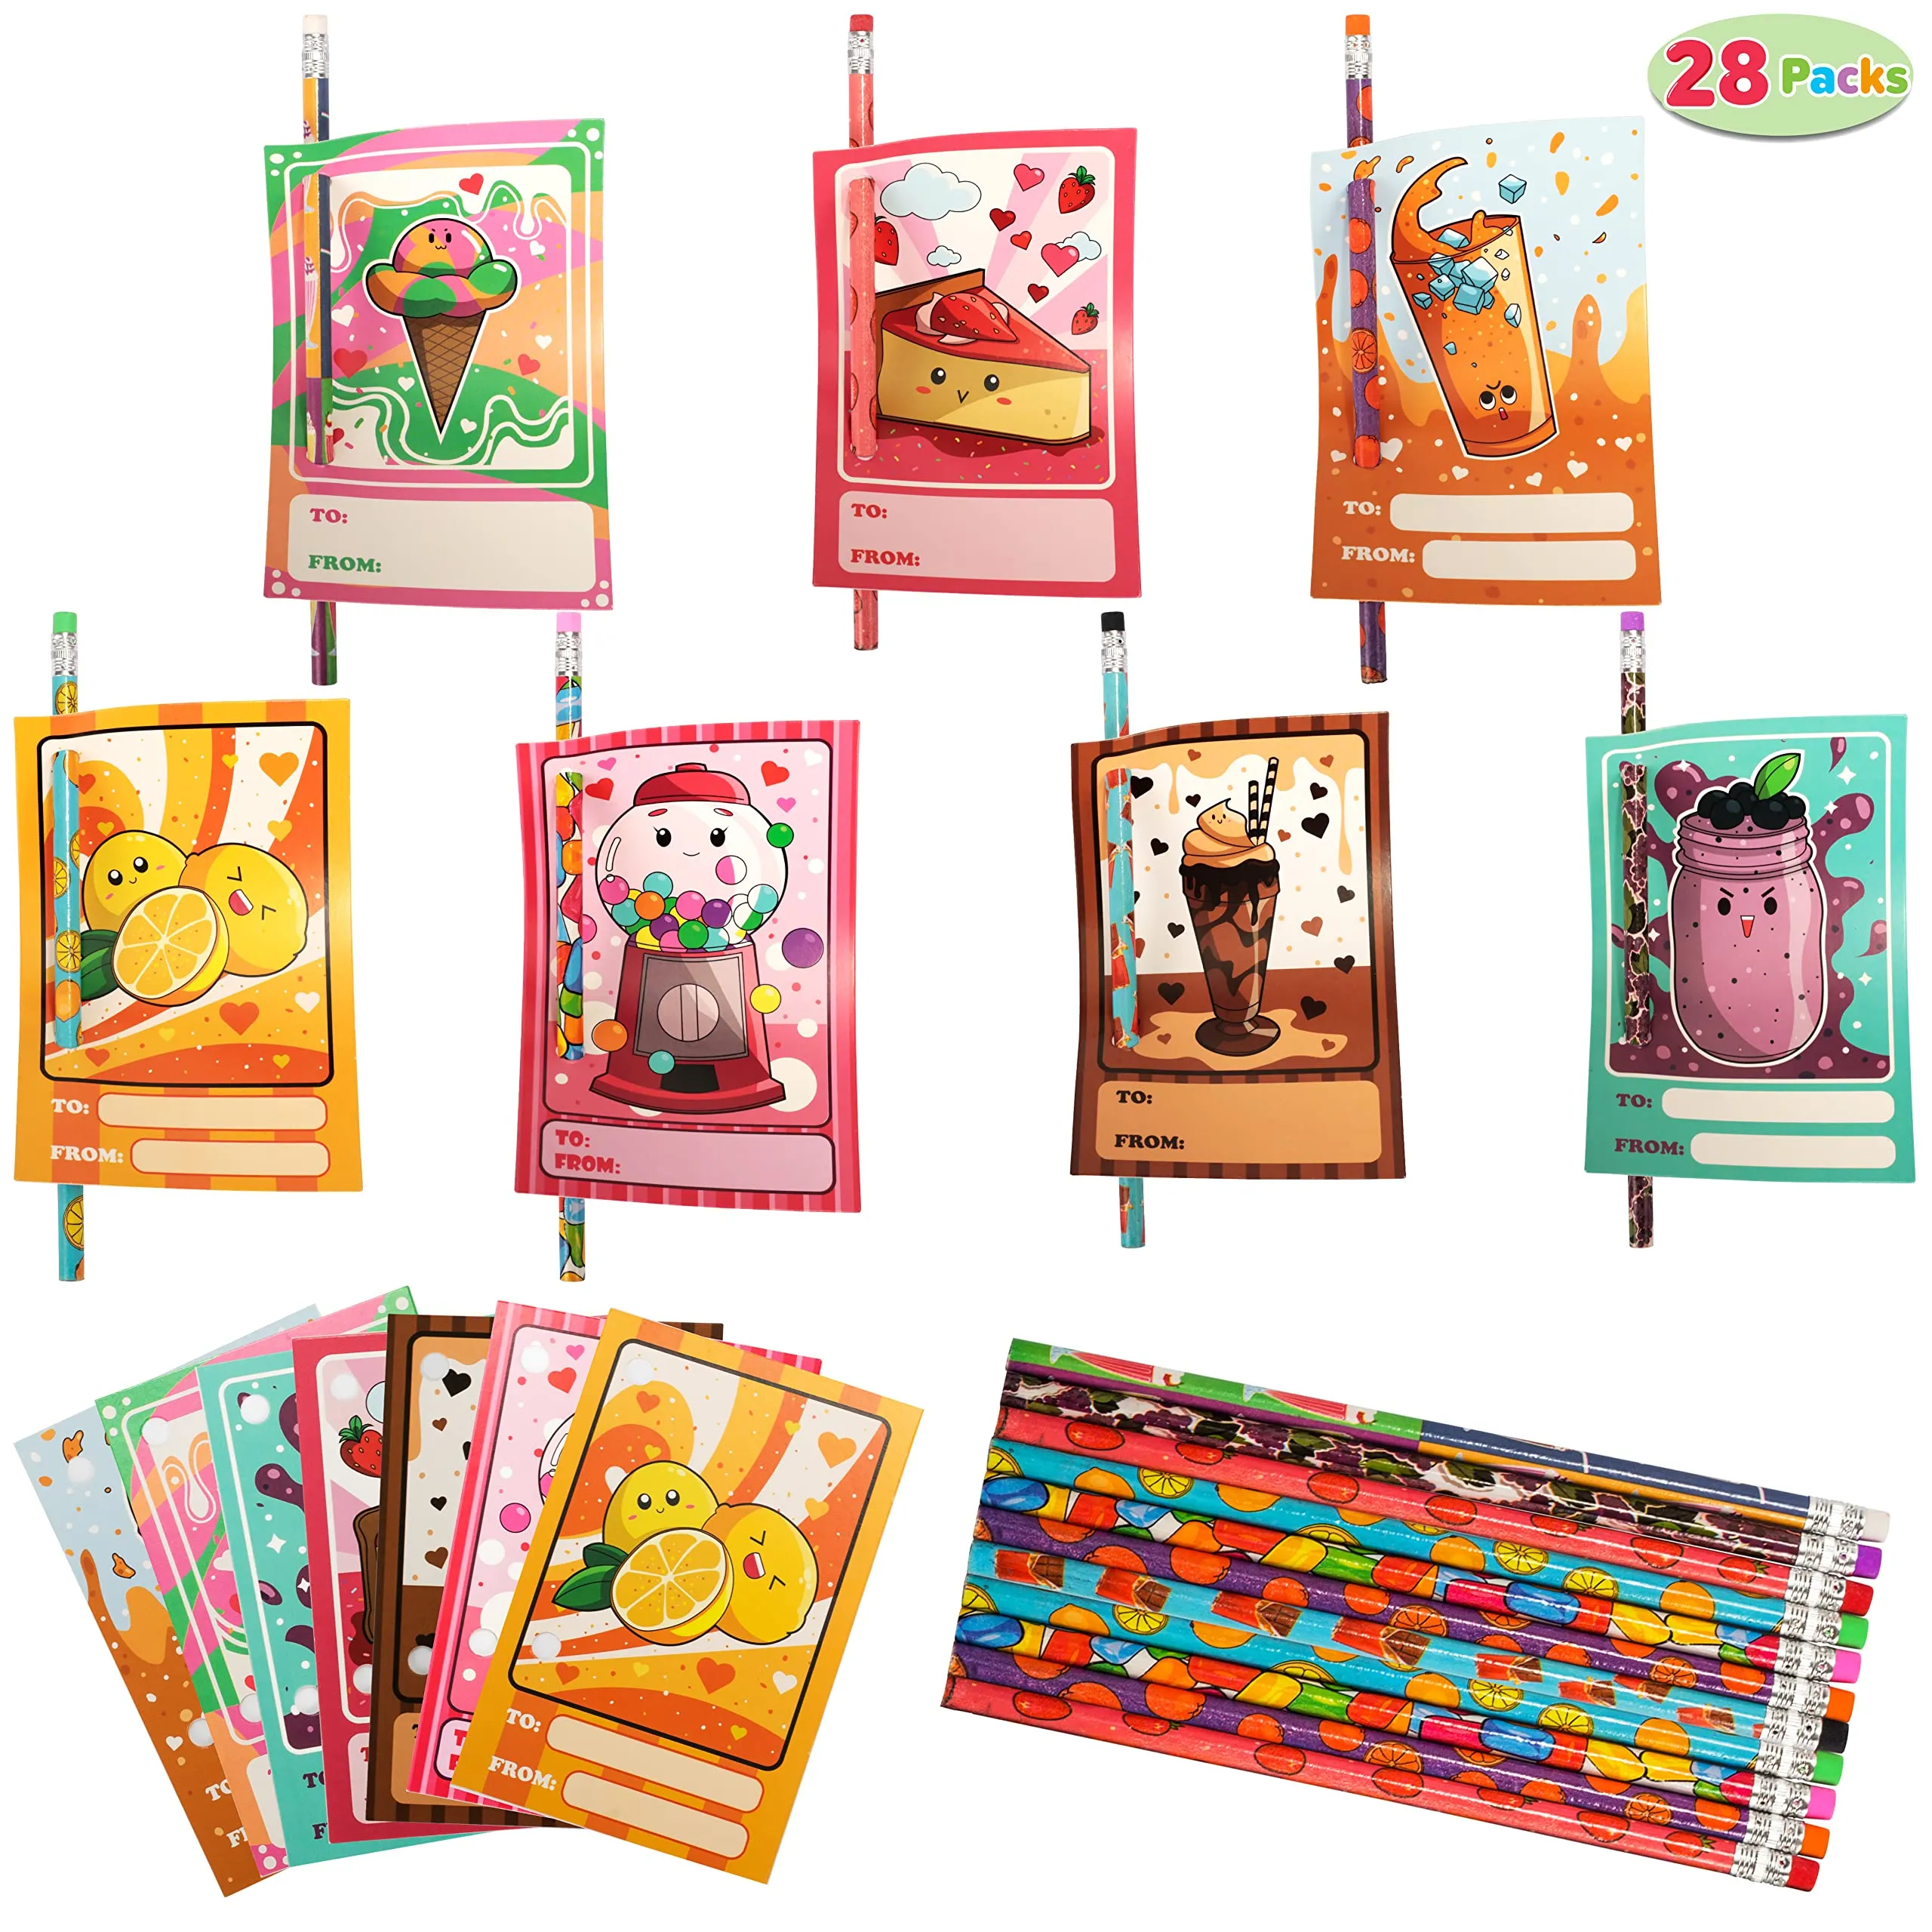 JOYIN 28 Packs Valentines Day Cards with Scented Pencils Kids, Valentine Gifts for Girls Boys School Classroom Exchange and Rewards,Valentine‘s